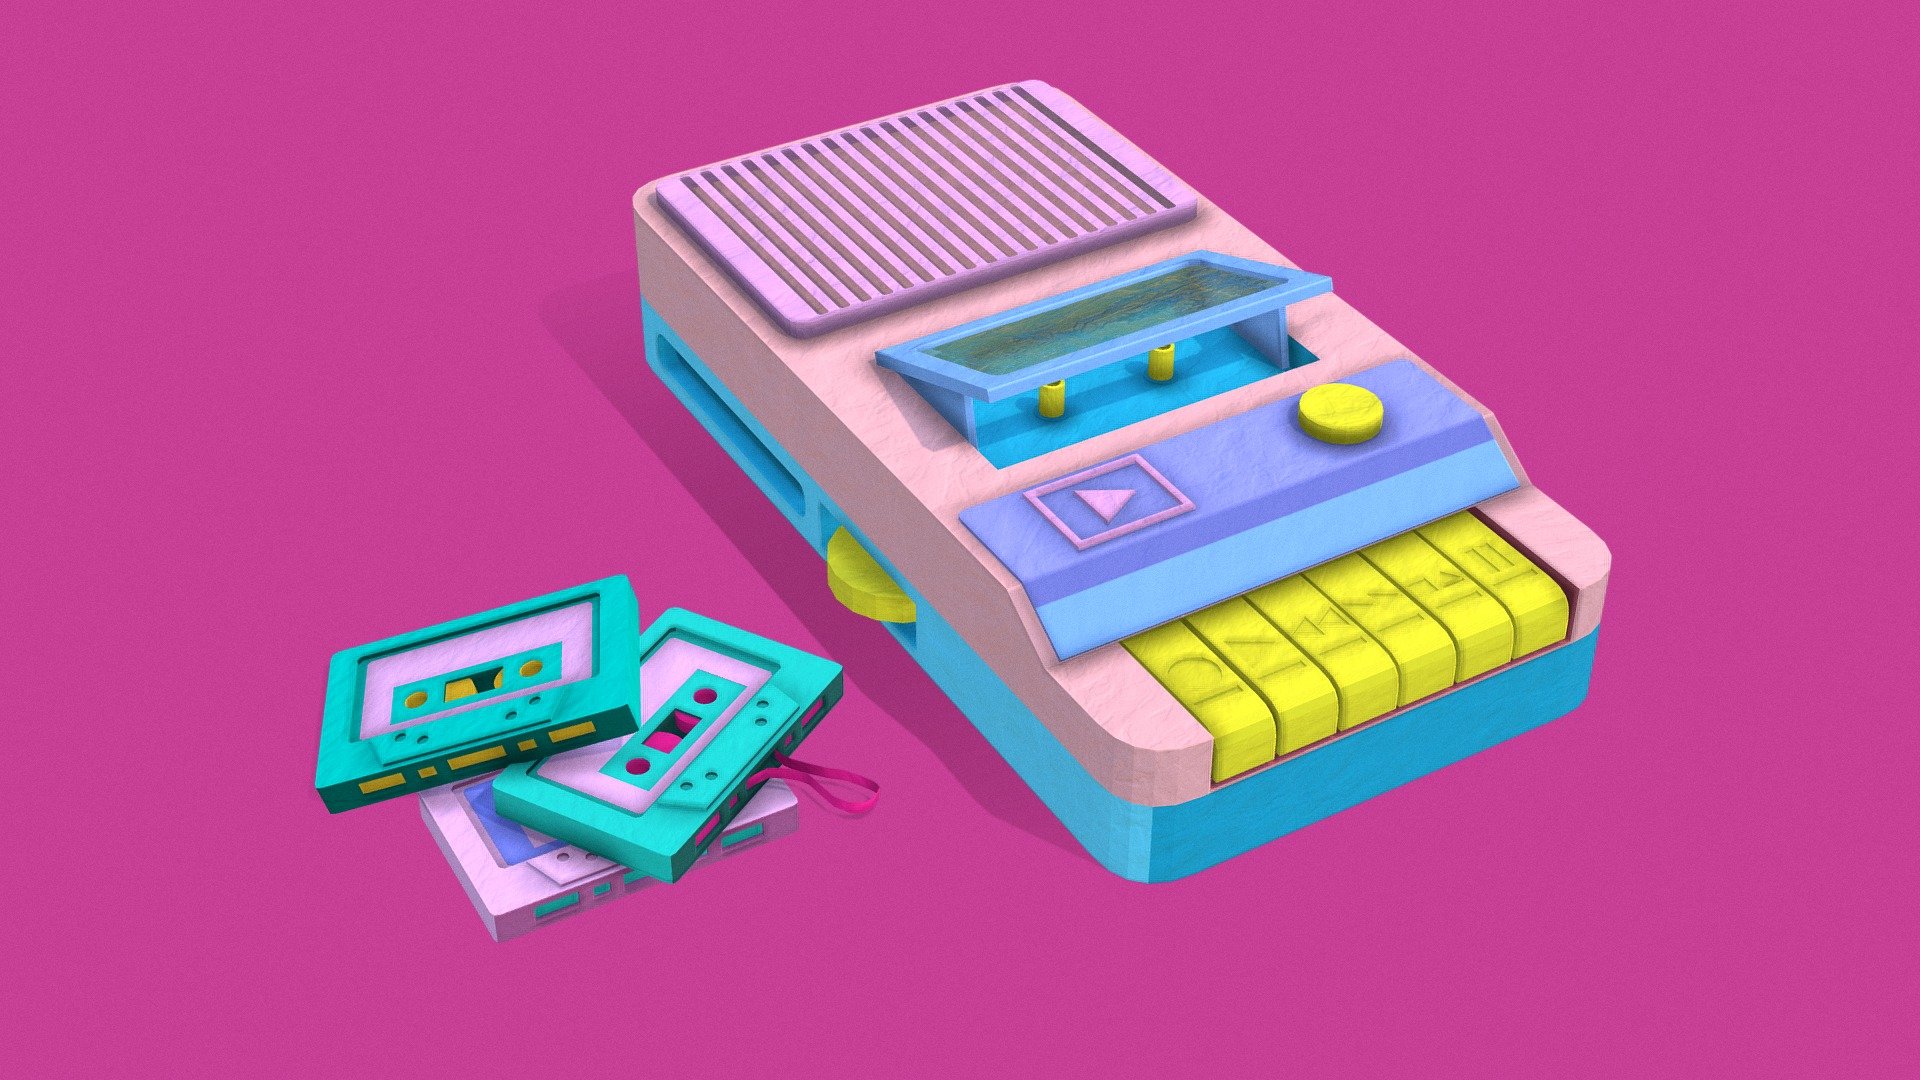 Concept by LULO! https://www.lulo.space/

I found this beautiful series of papercraft models and I had to try modelling one myself! - Paper-craft Cassette Player - 3D model by Silverlace 3d model